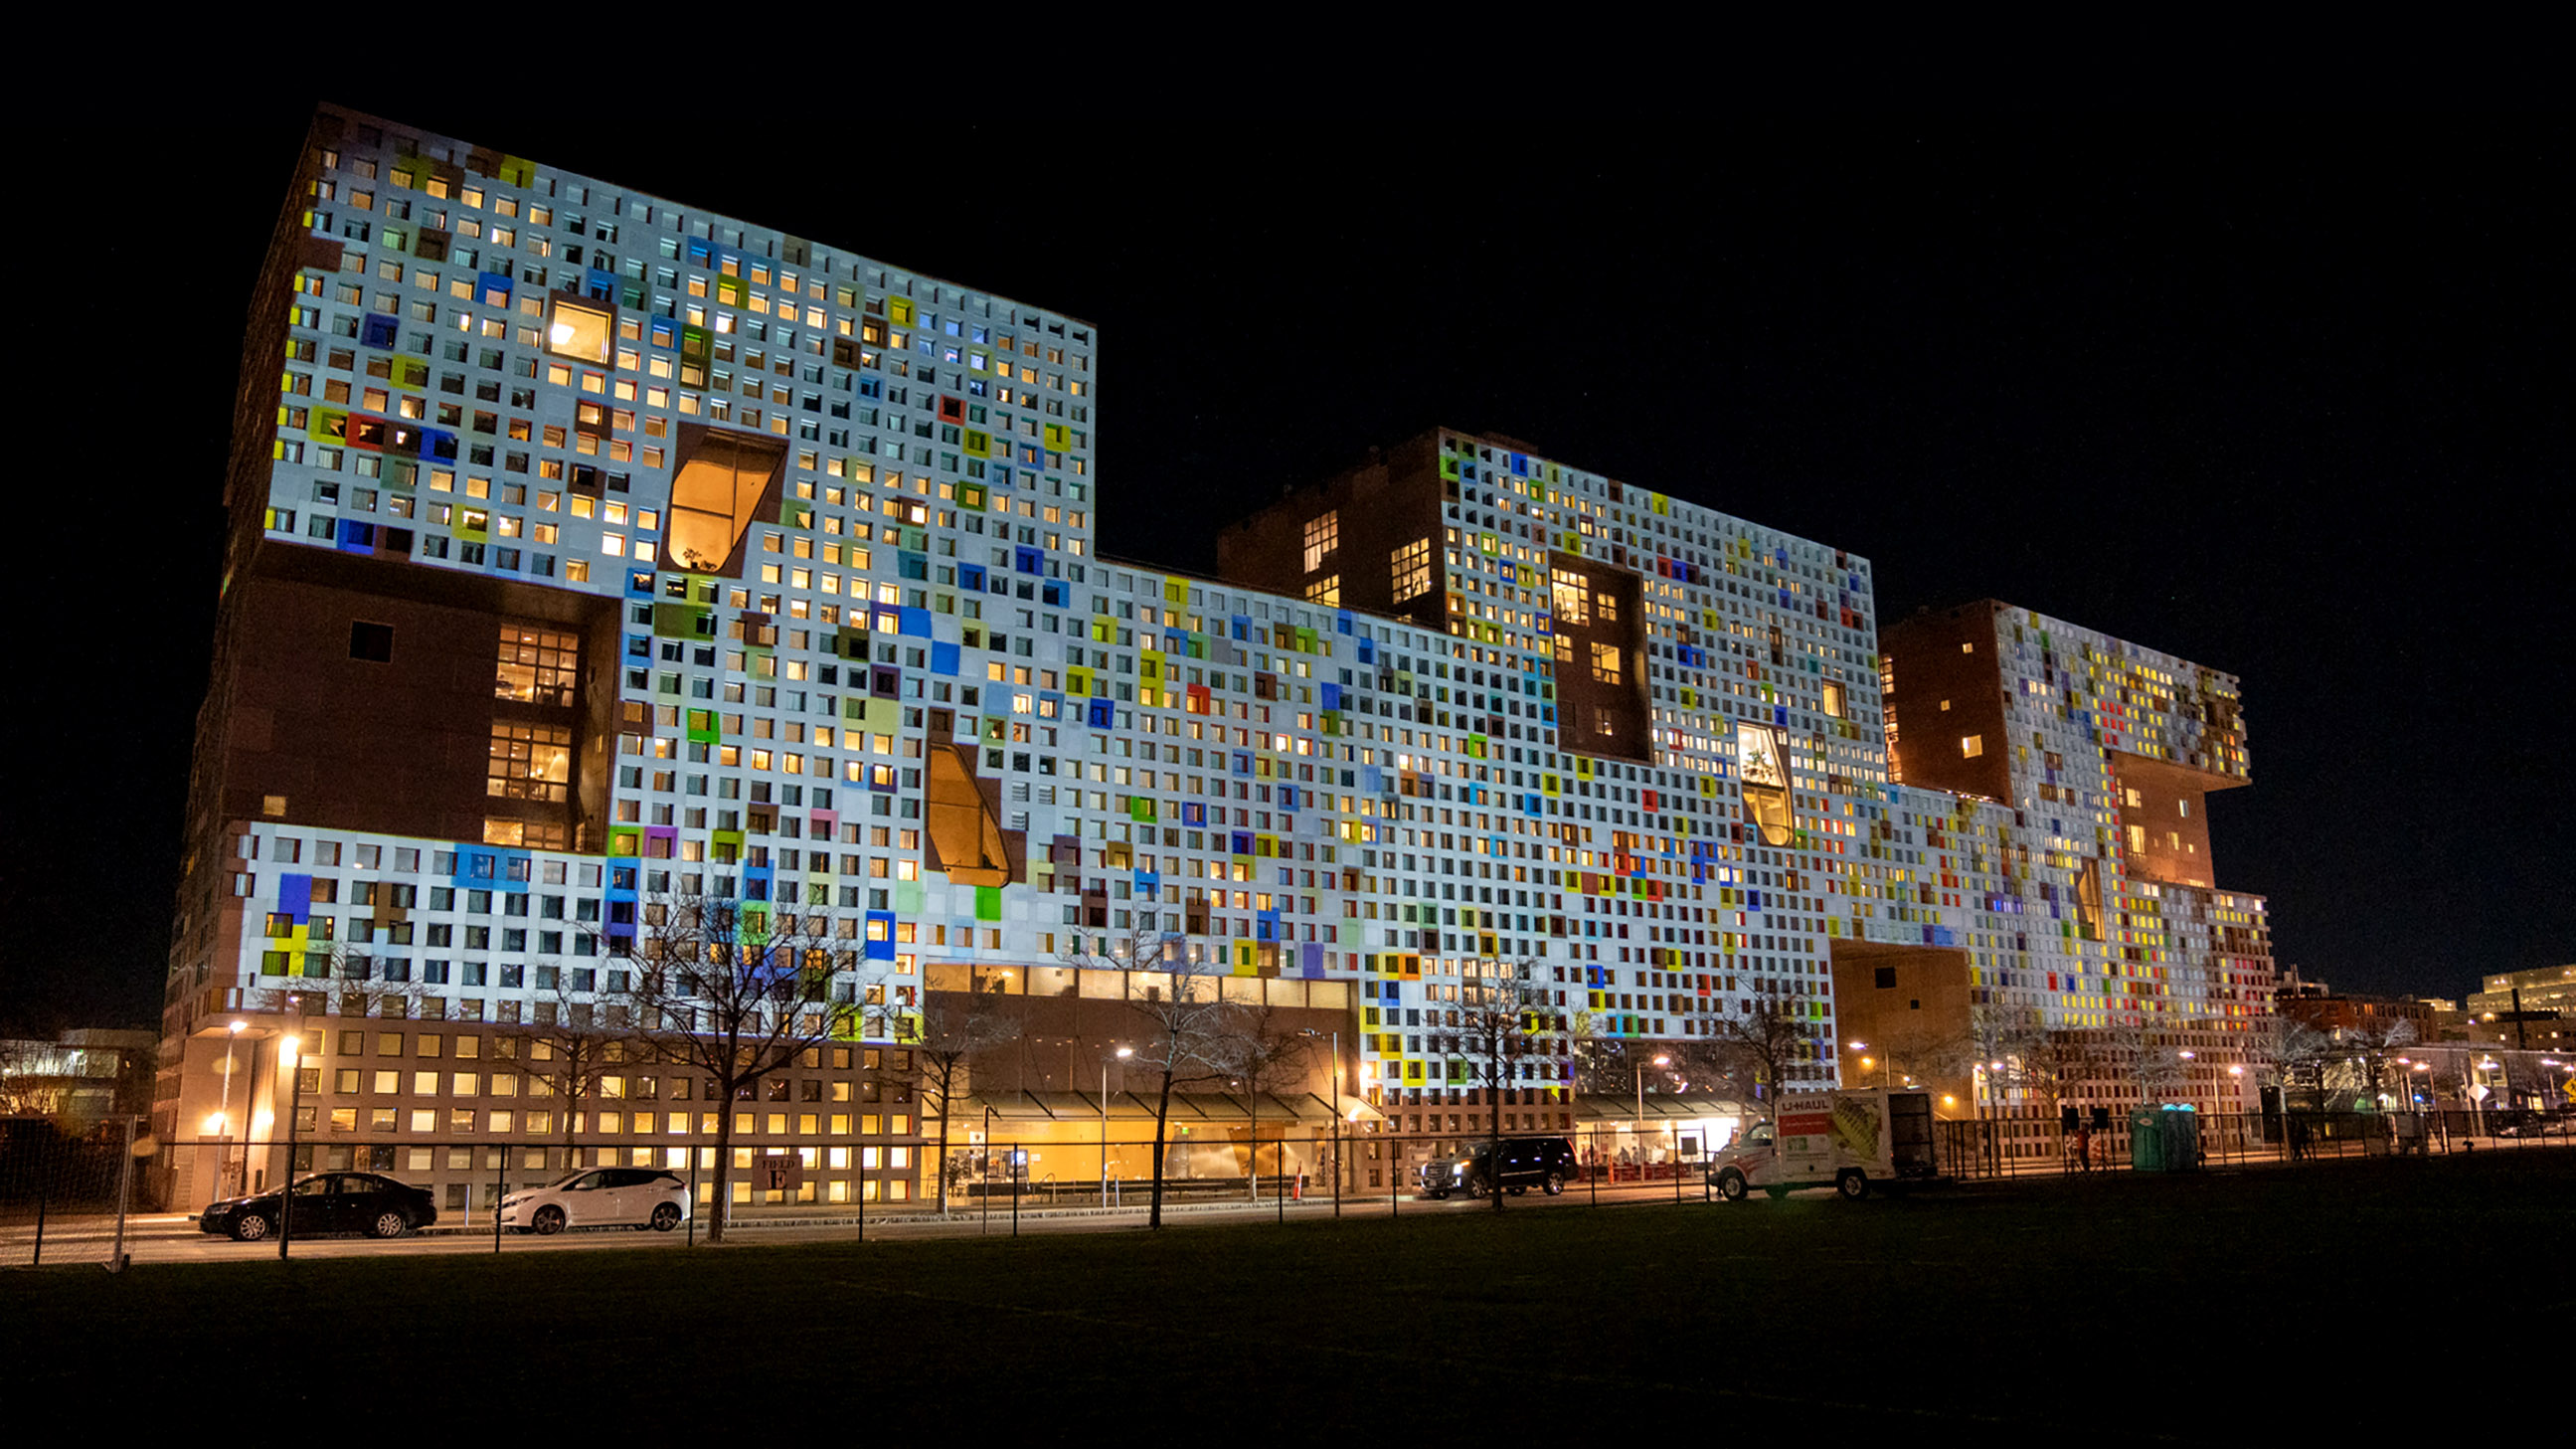 Simmons Hall at night with projection